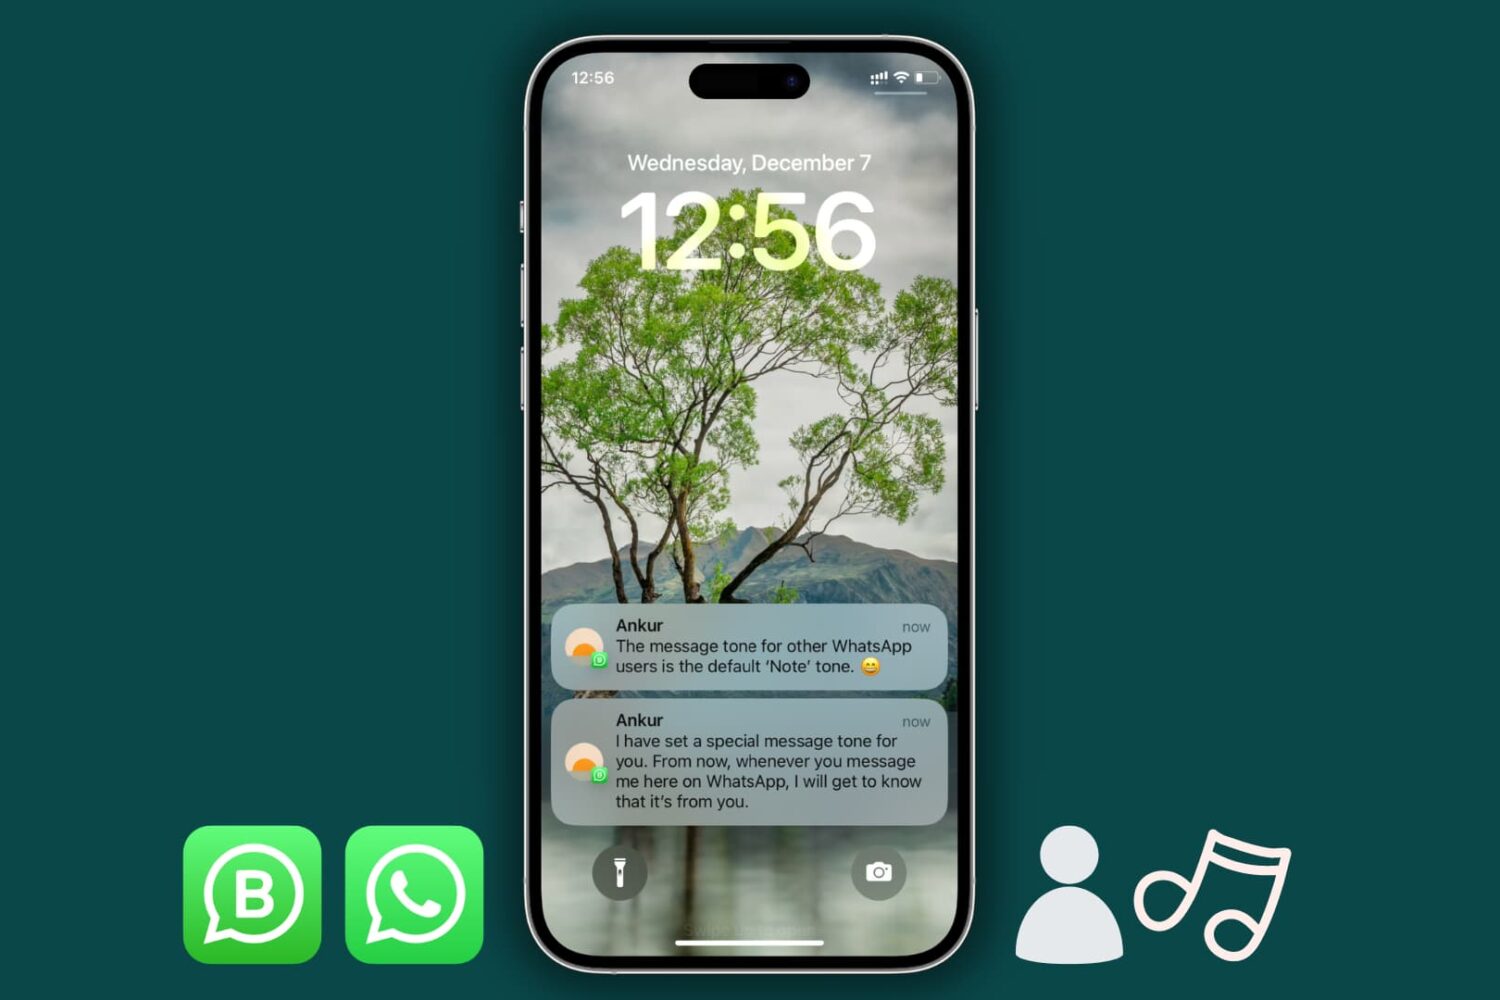 iPhone Lock Screen showing two WhatsApp messages